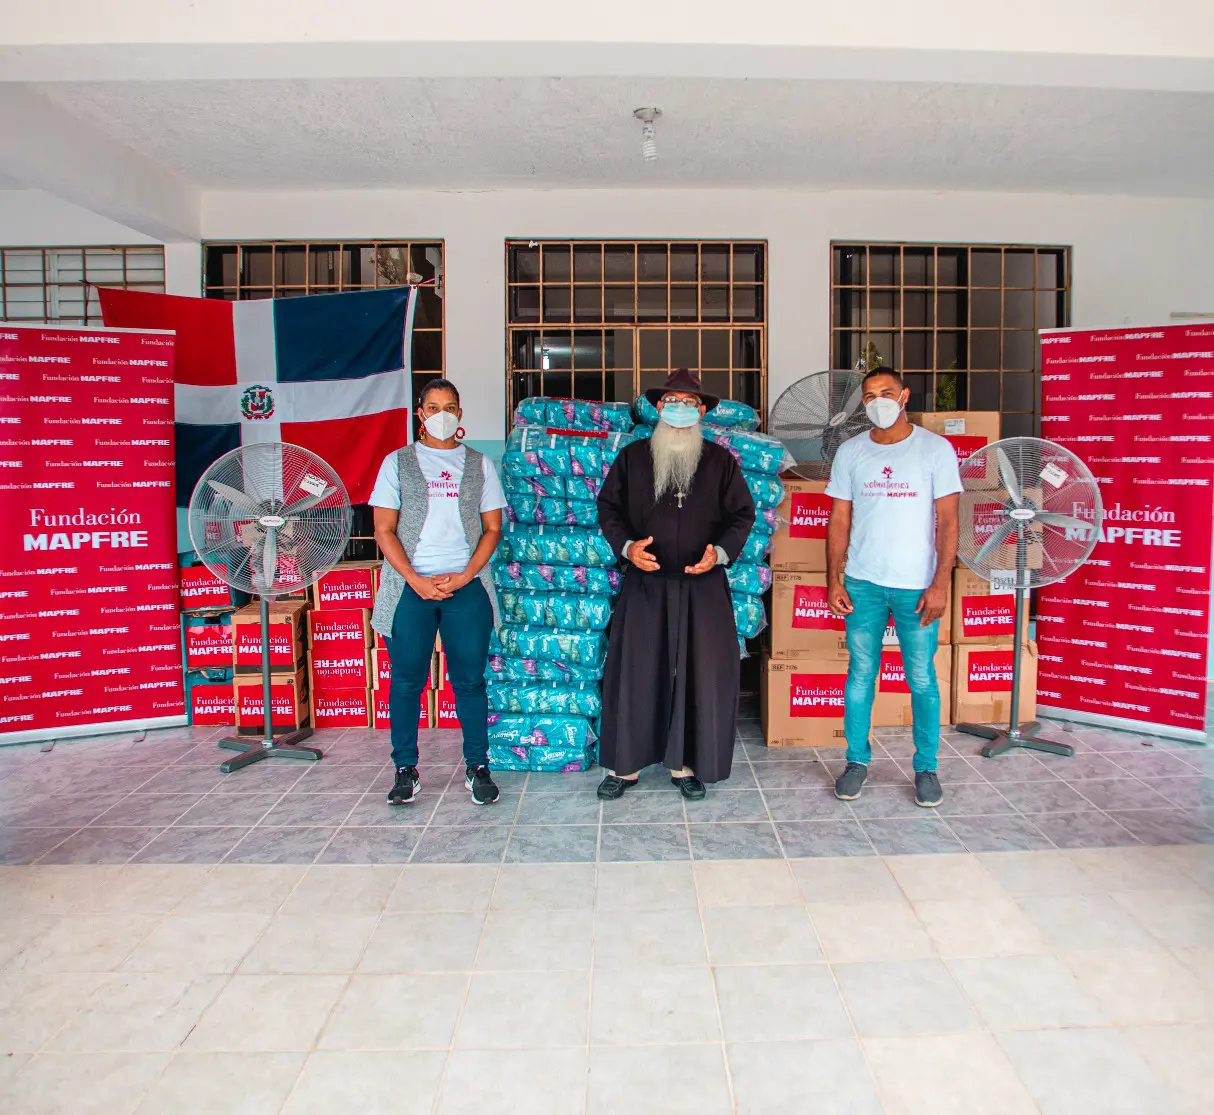 Fundación MAPFRE increases donations to older people in the Dominican Republic